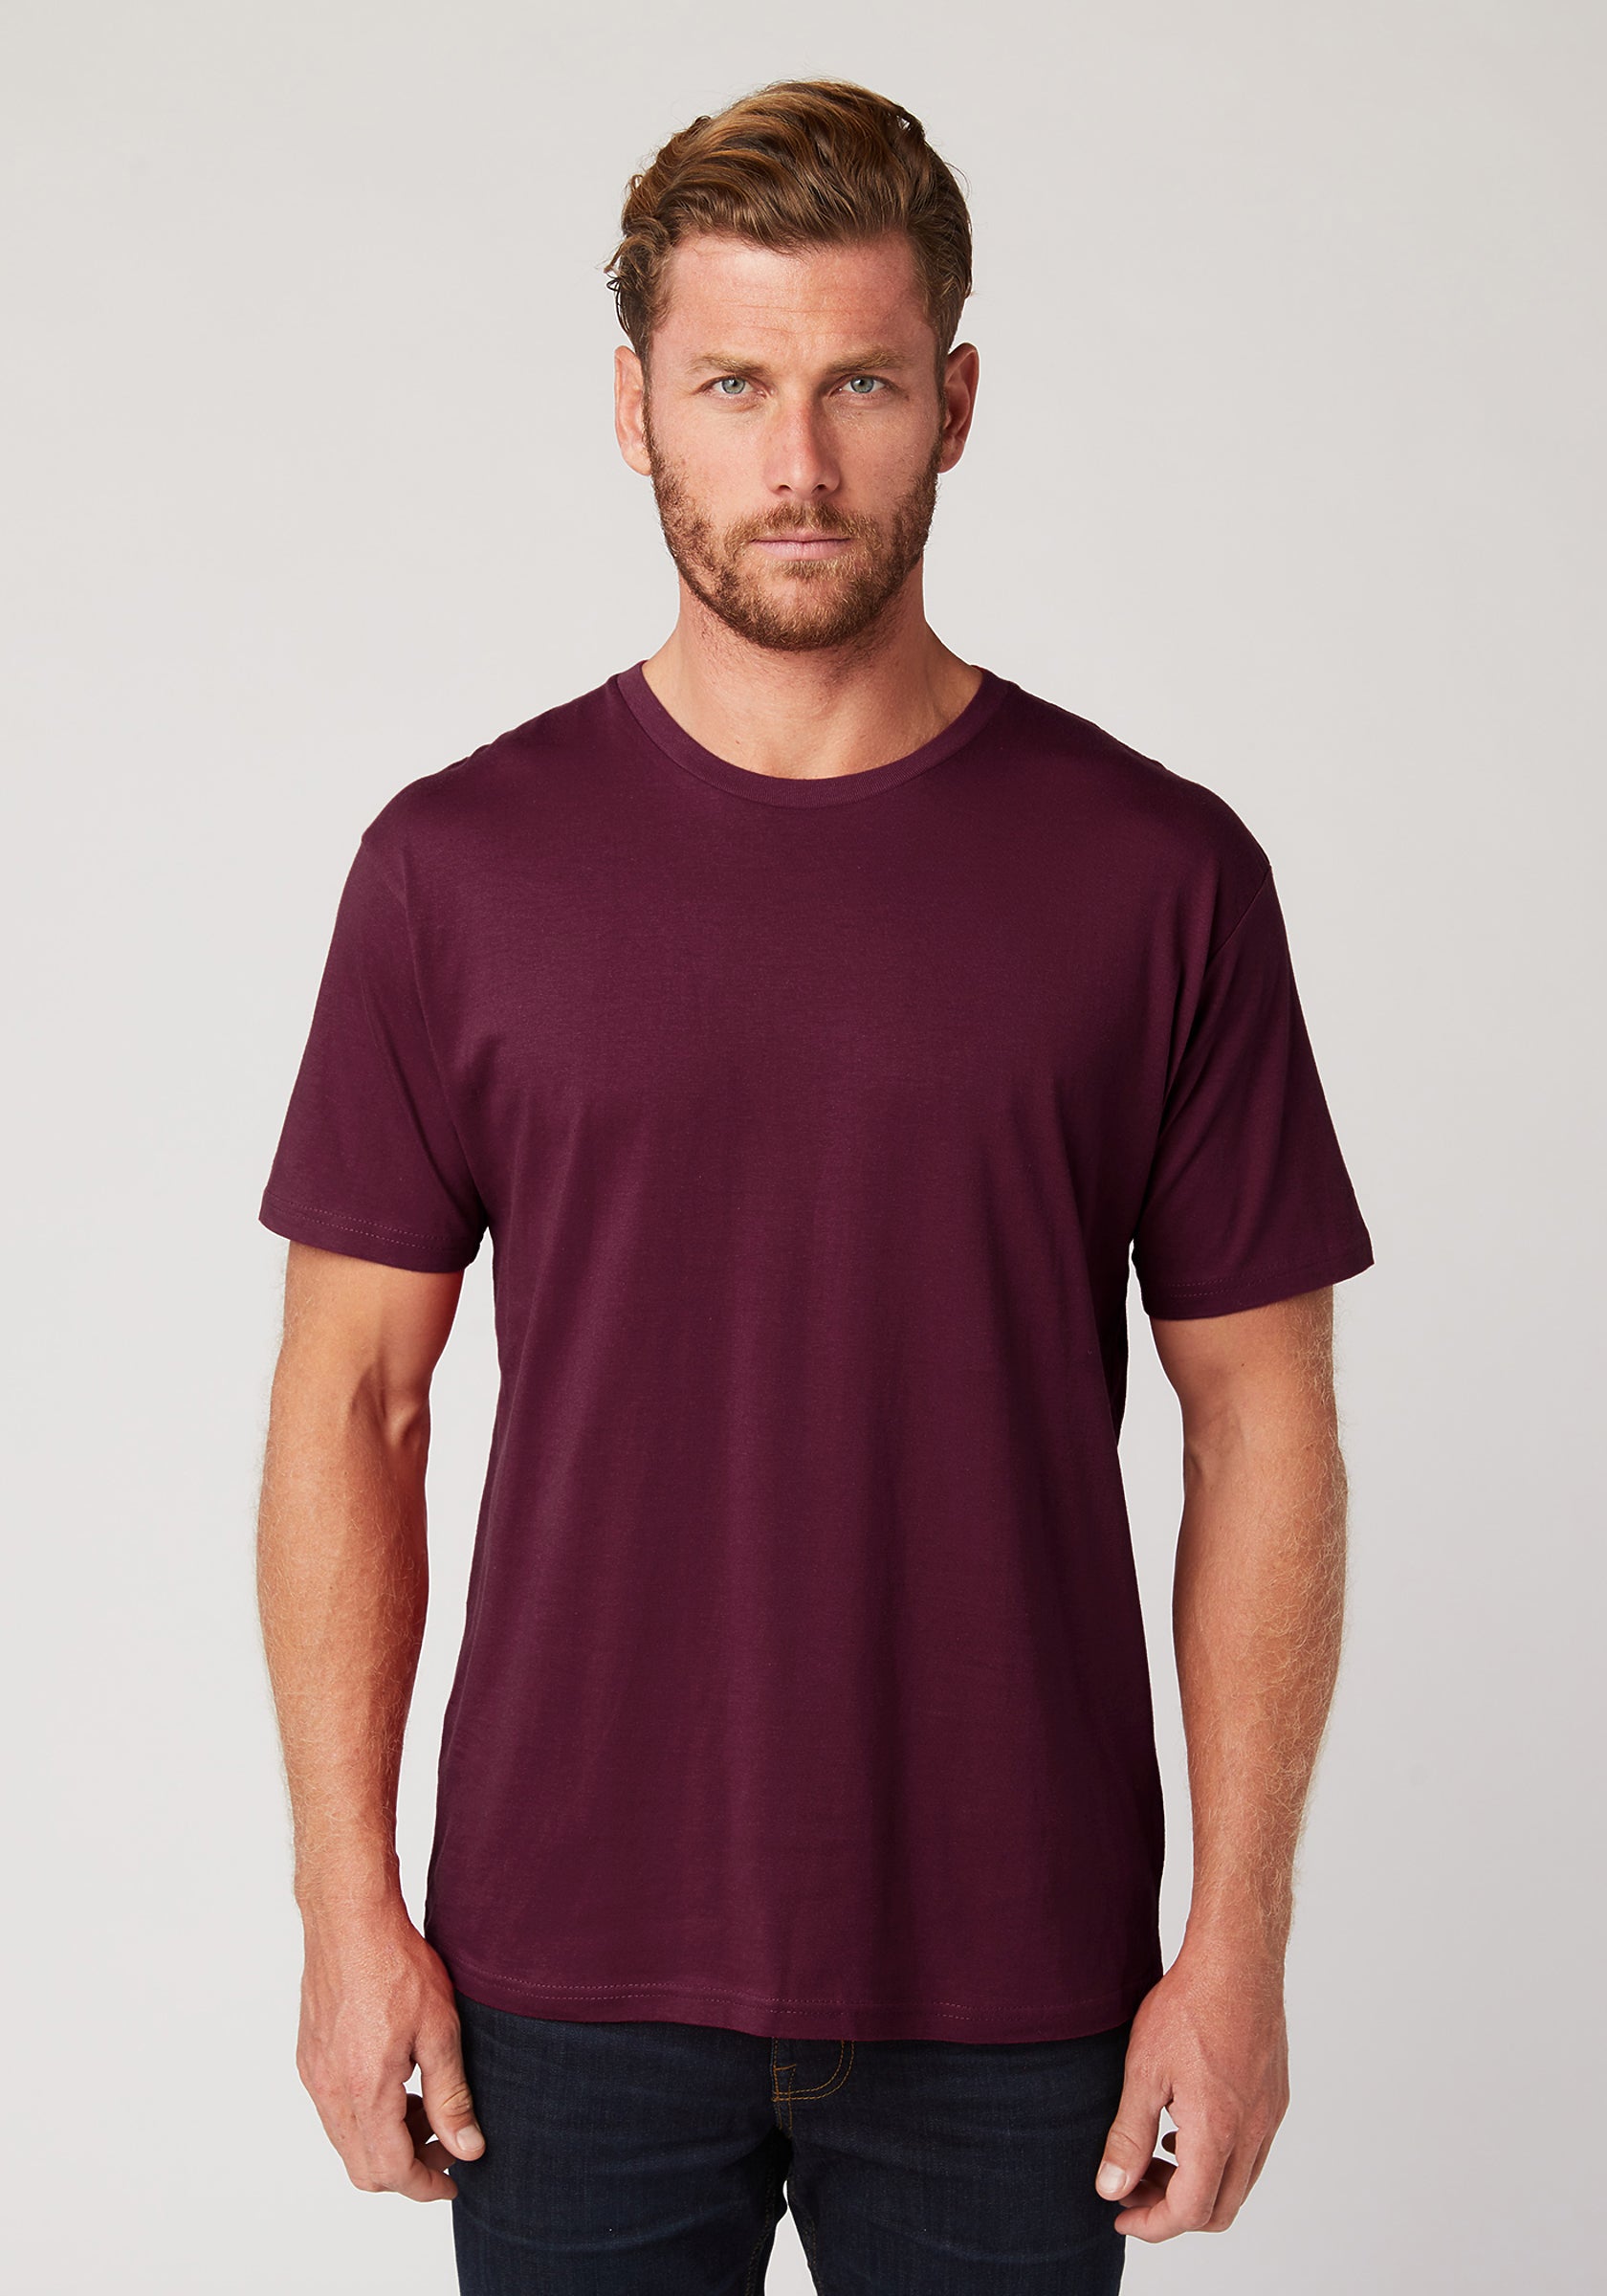 CH BLANK TEE- MAROON - Lucky and Blessed Life LLC / L&B Life